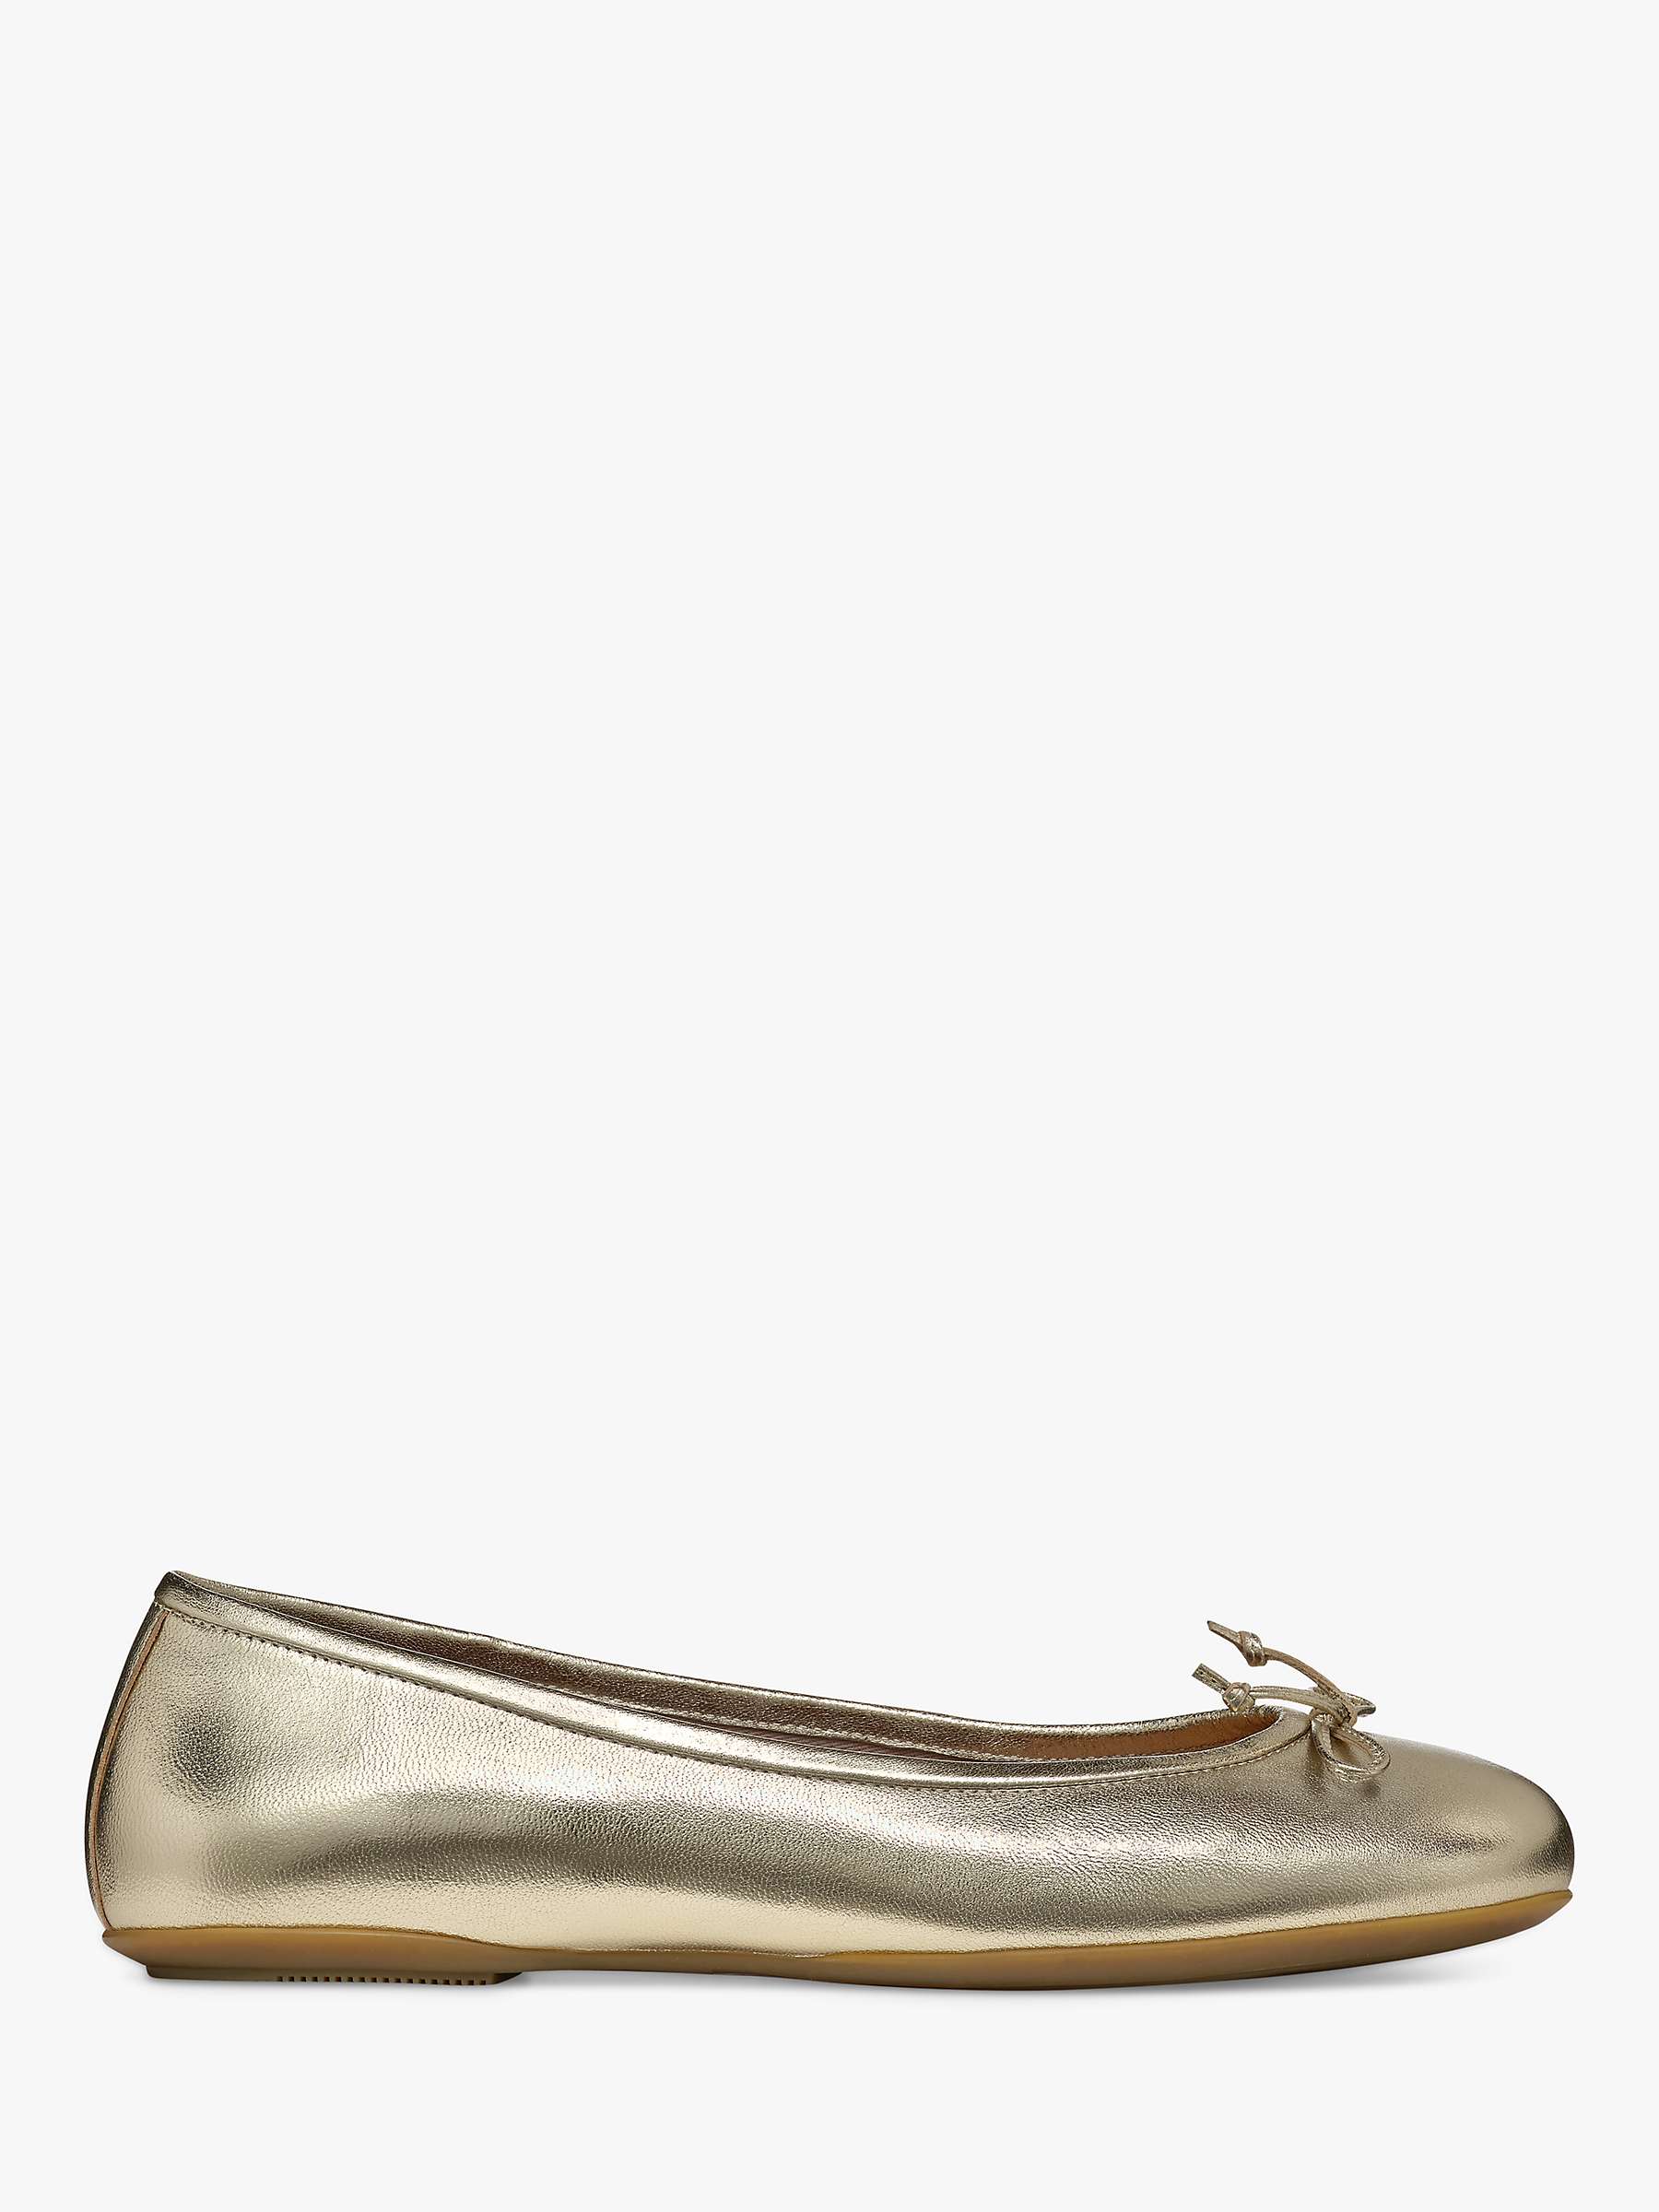 Buy Geox Palmaria Leather Ballerina Shoes, Gold Online at johnlewis.com